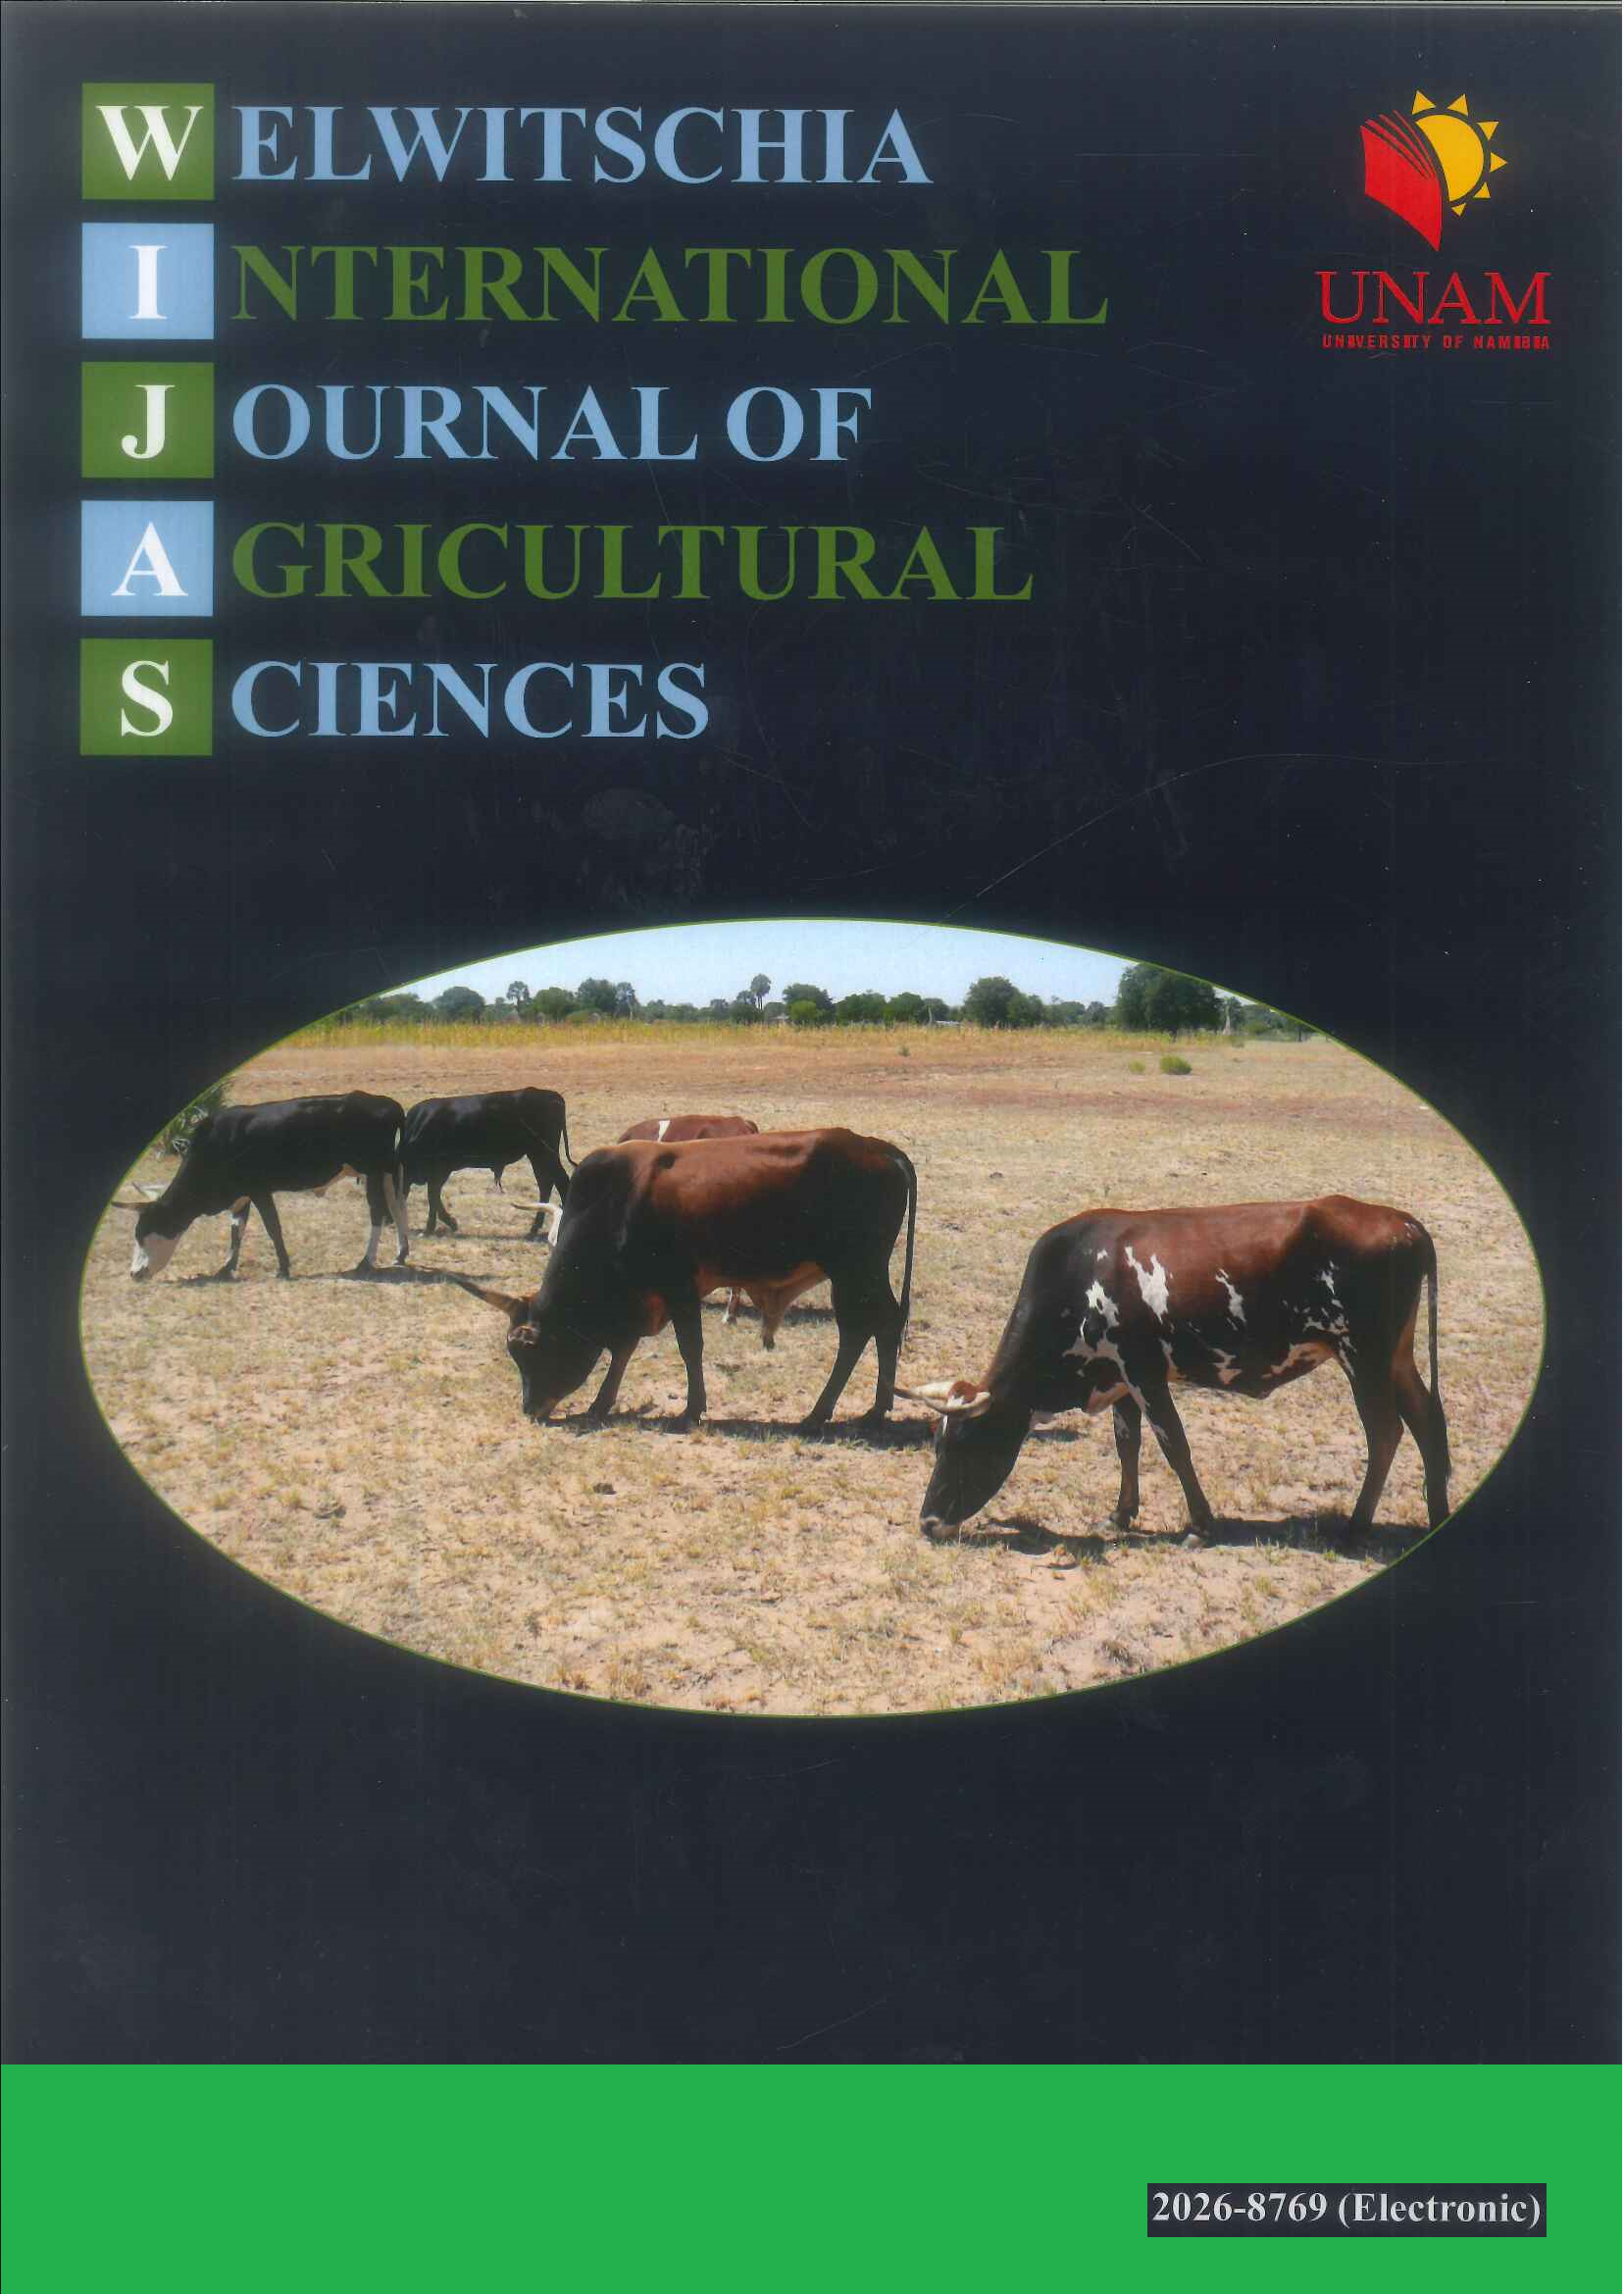 					View Vol. 3 (2022): Welwitschia International Journal of Agricultural Sciences
				